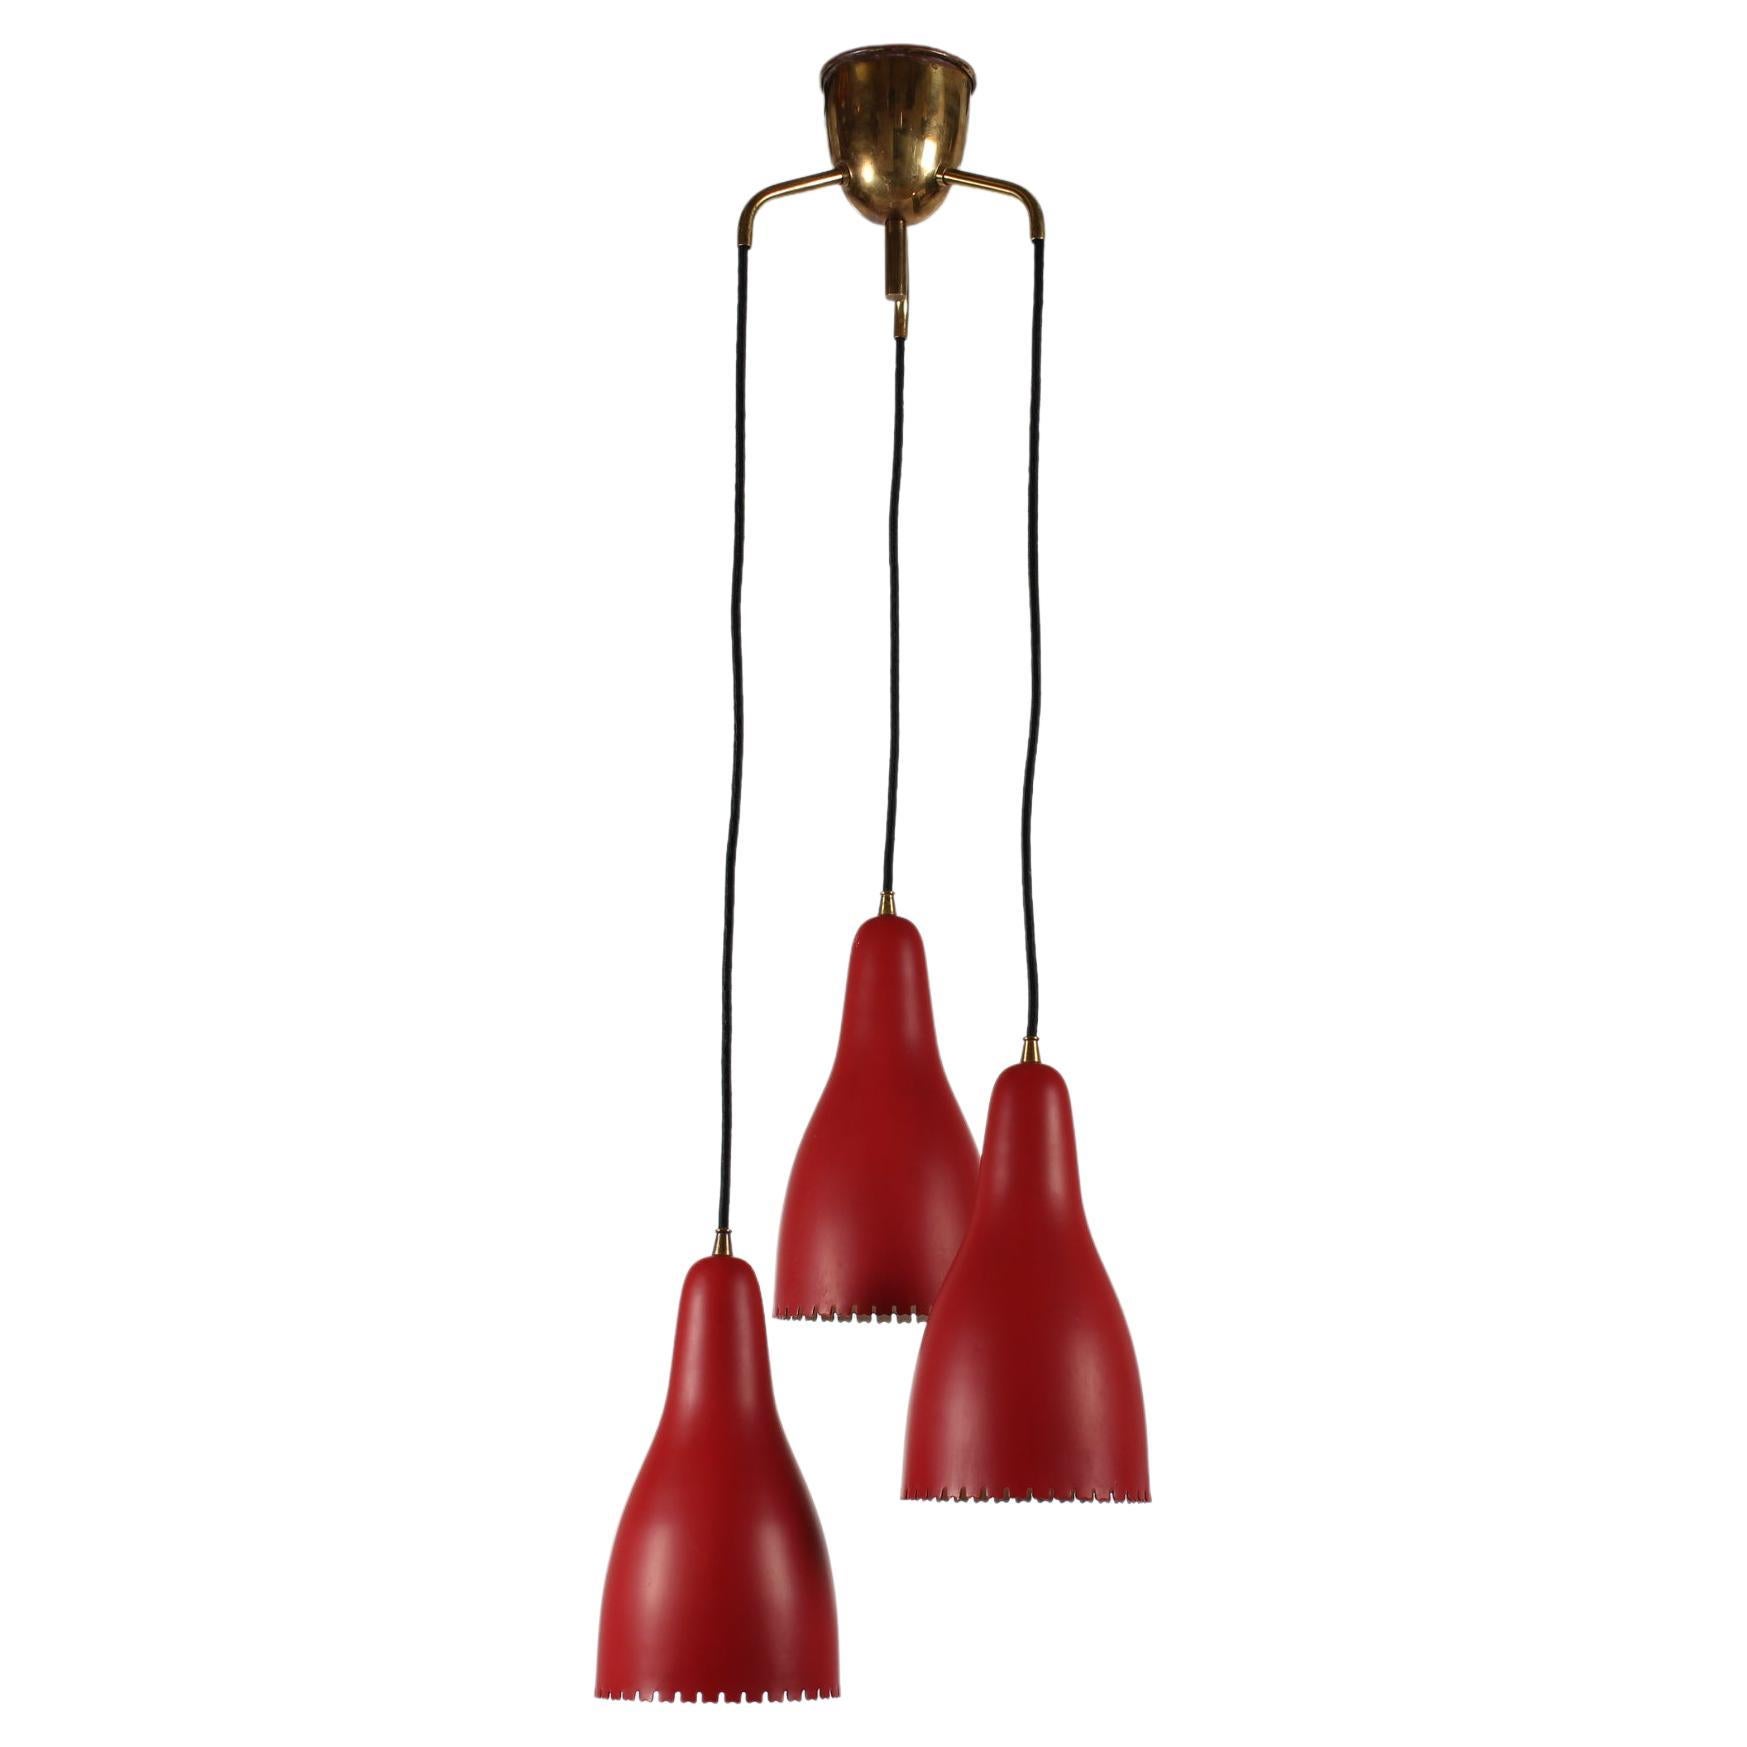 Bent Karlby 3-Cone Chandelier with Red Lacquer Made by Lyfa in Denmarkk, 1950s For Sale